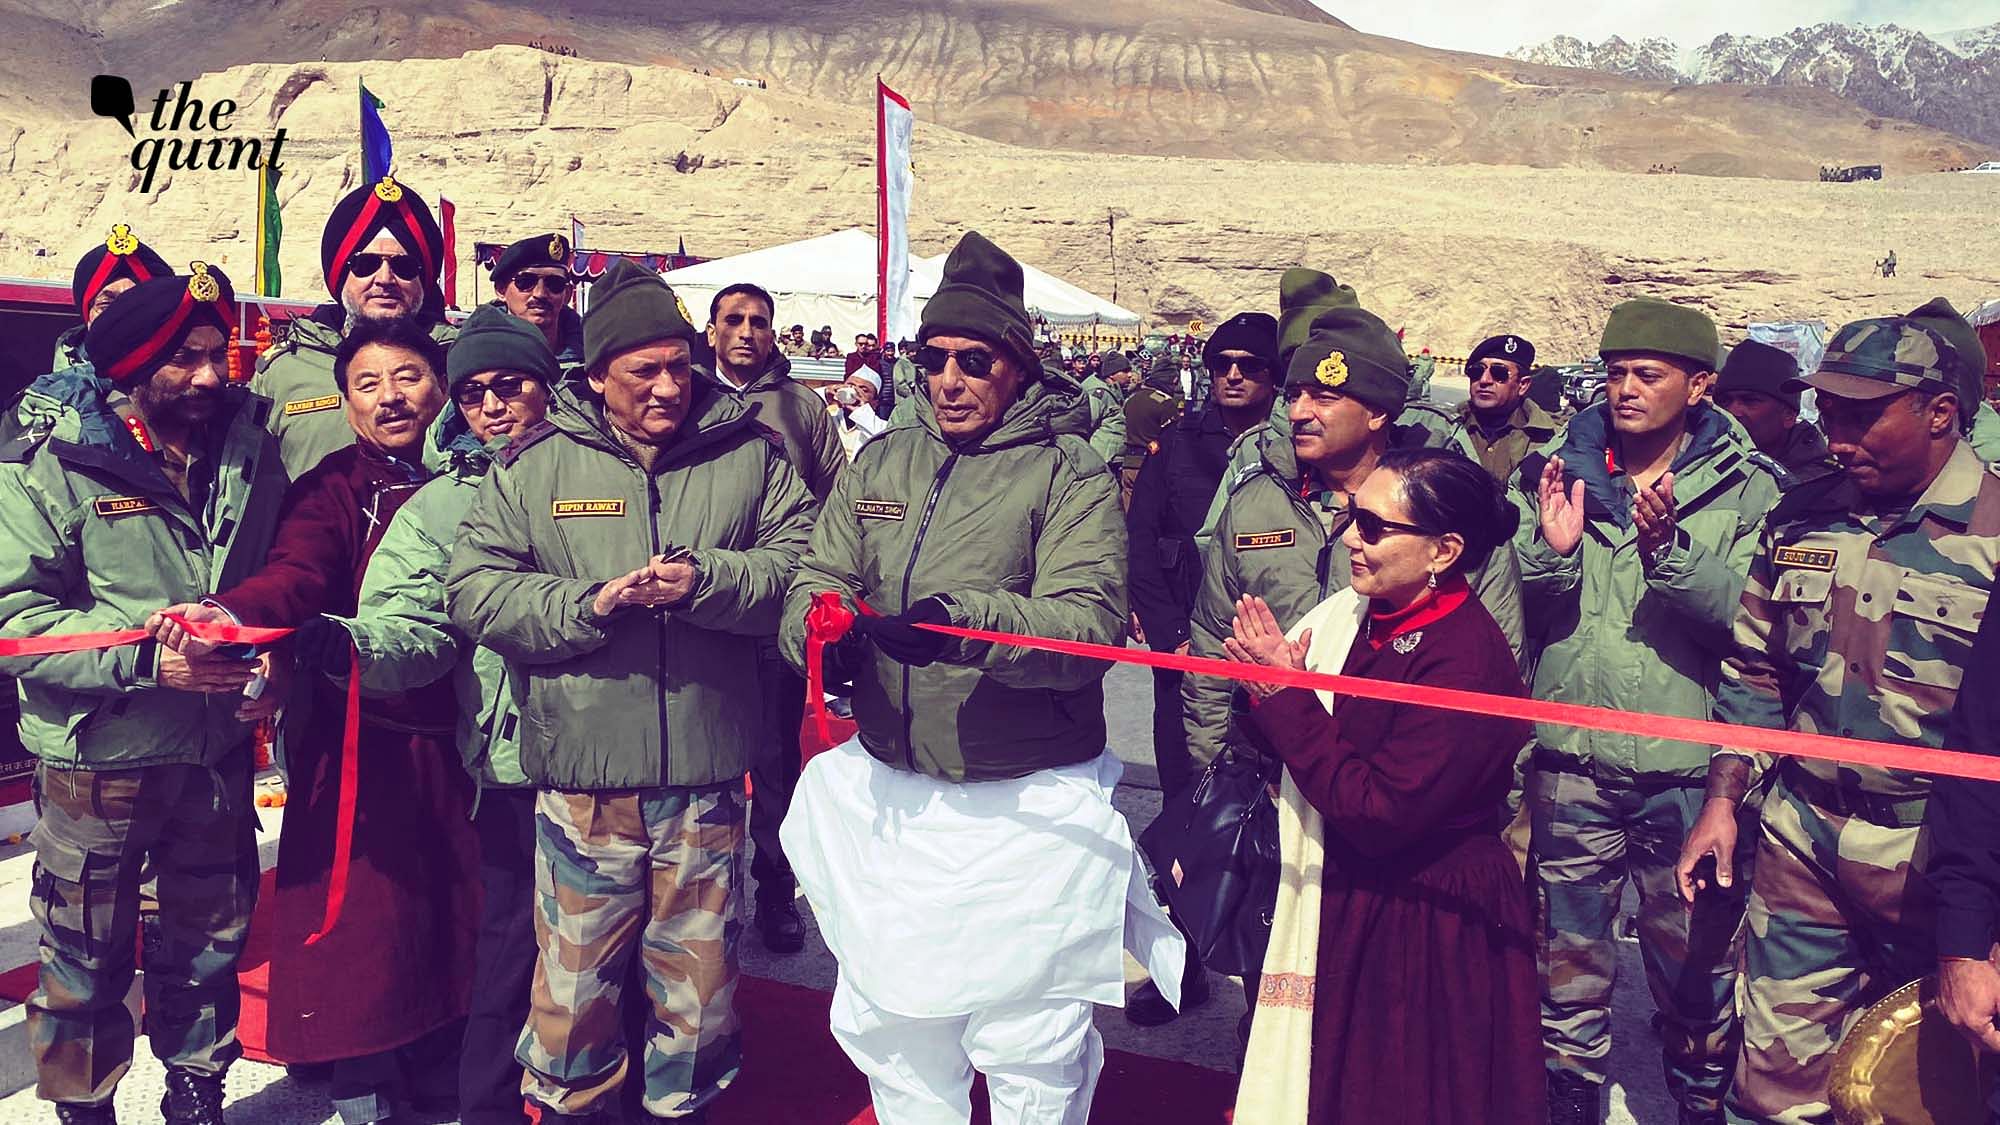 Image of Defence Minister Rajnath Singh at Siachen, used for representational purposes.